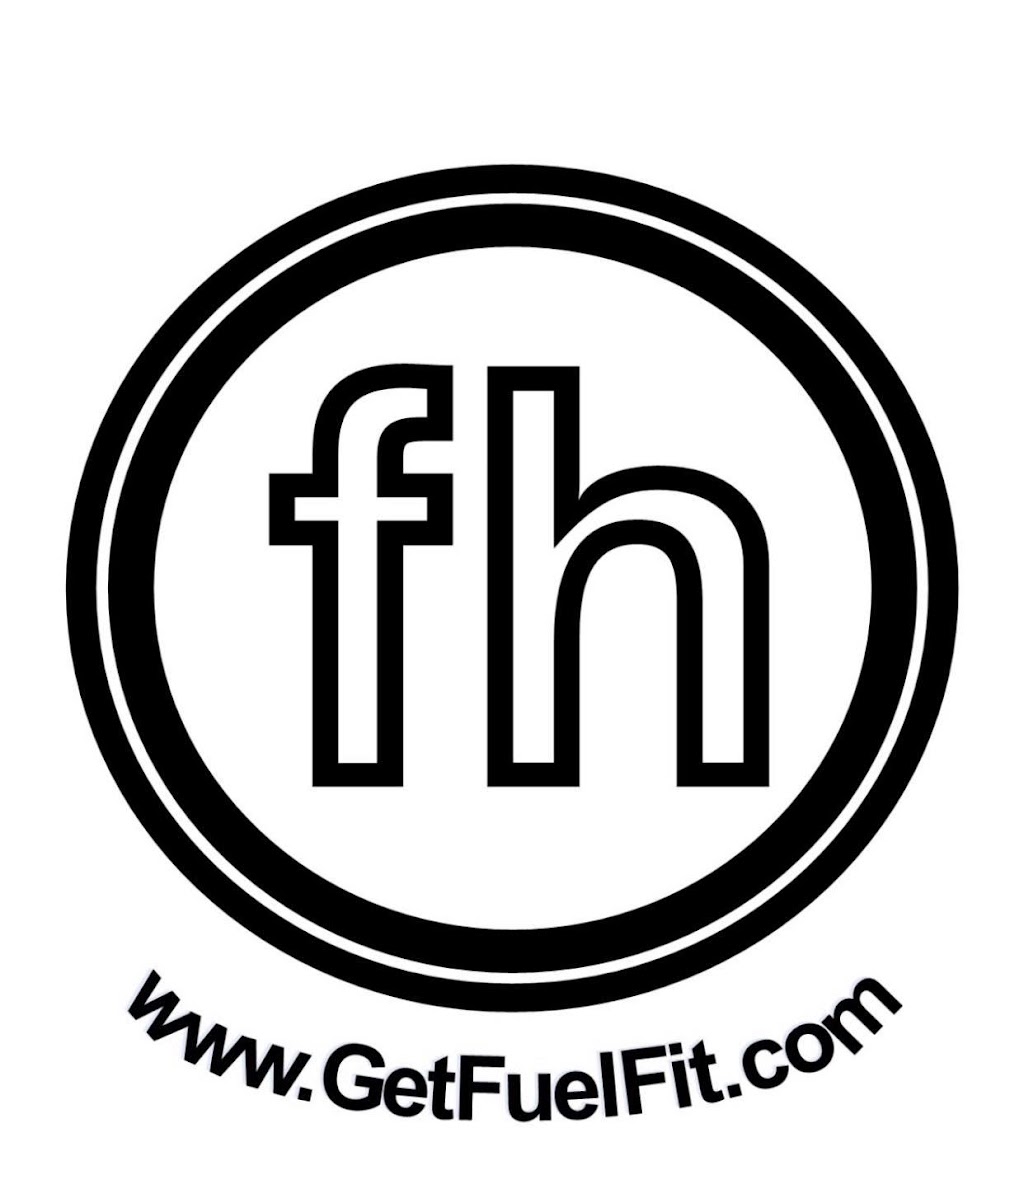 FUEL House Fitness Studio, LLC | 4912 Pennell Rd, Aston, PA 19014 | Phone: (610) 800-8243